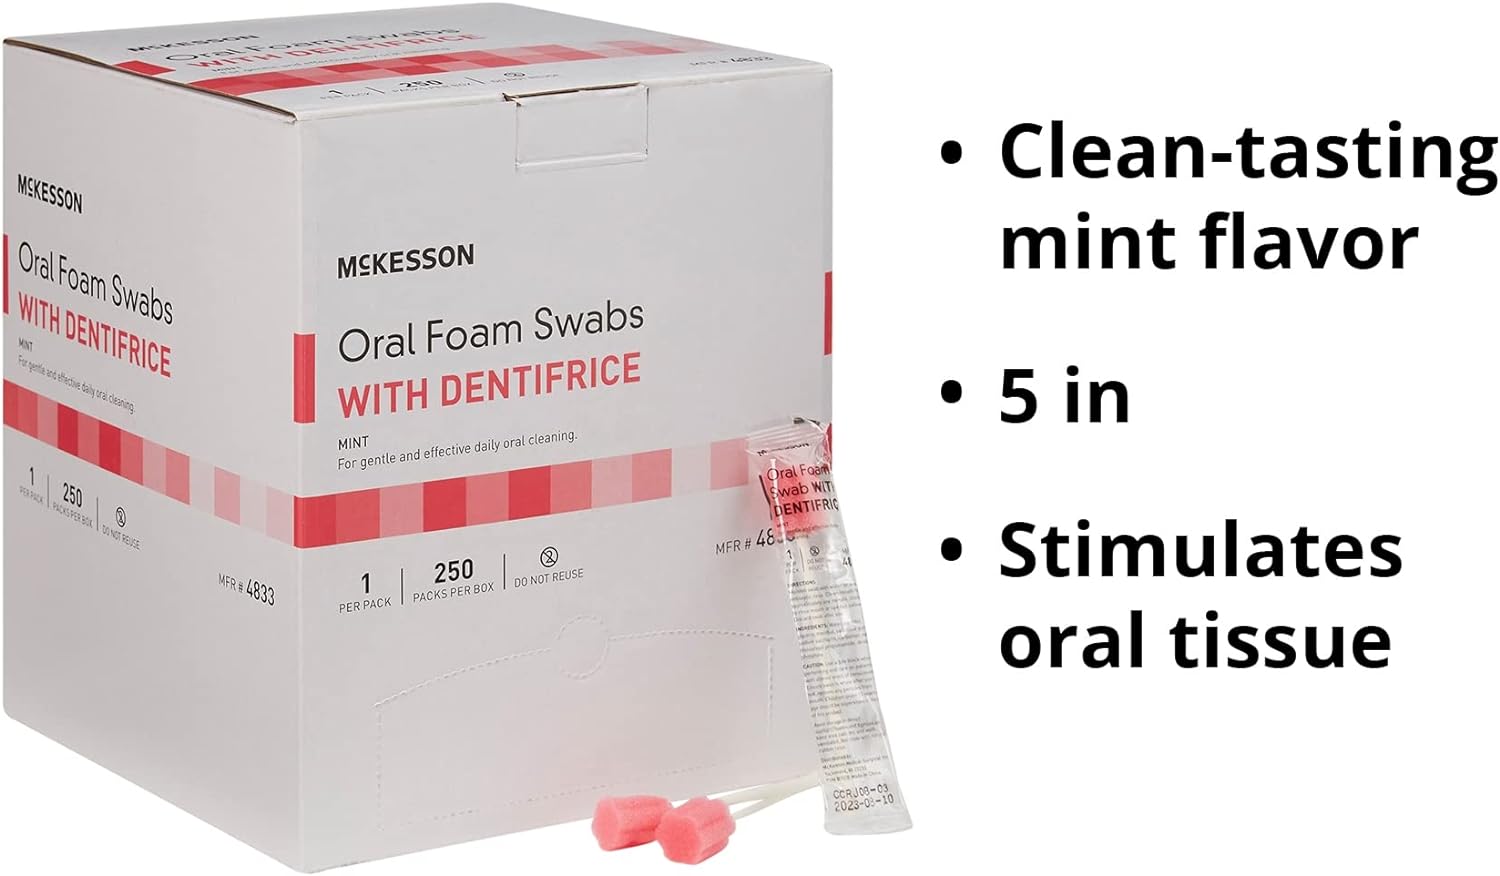 McKesson Oral Foam Swabs with Dentifrice, Gentle and Daily Oral Cleaning, Mint, 250 Count, 4 Packs, 1000 Total